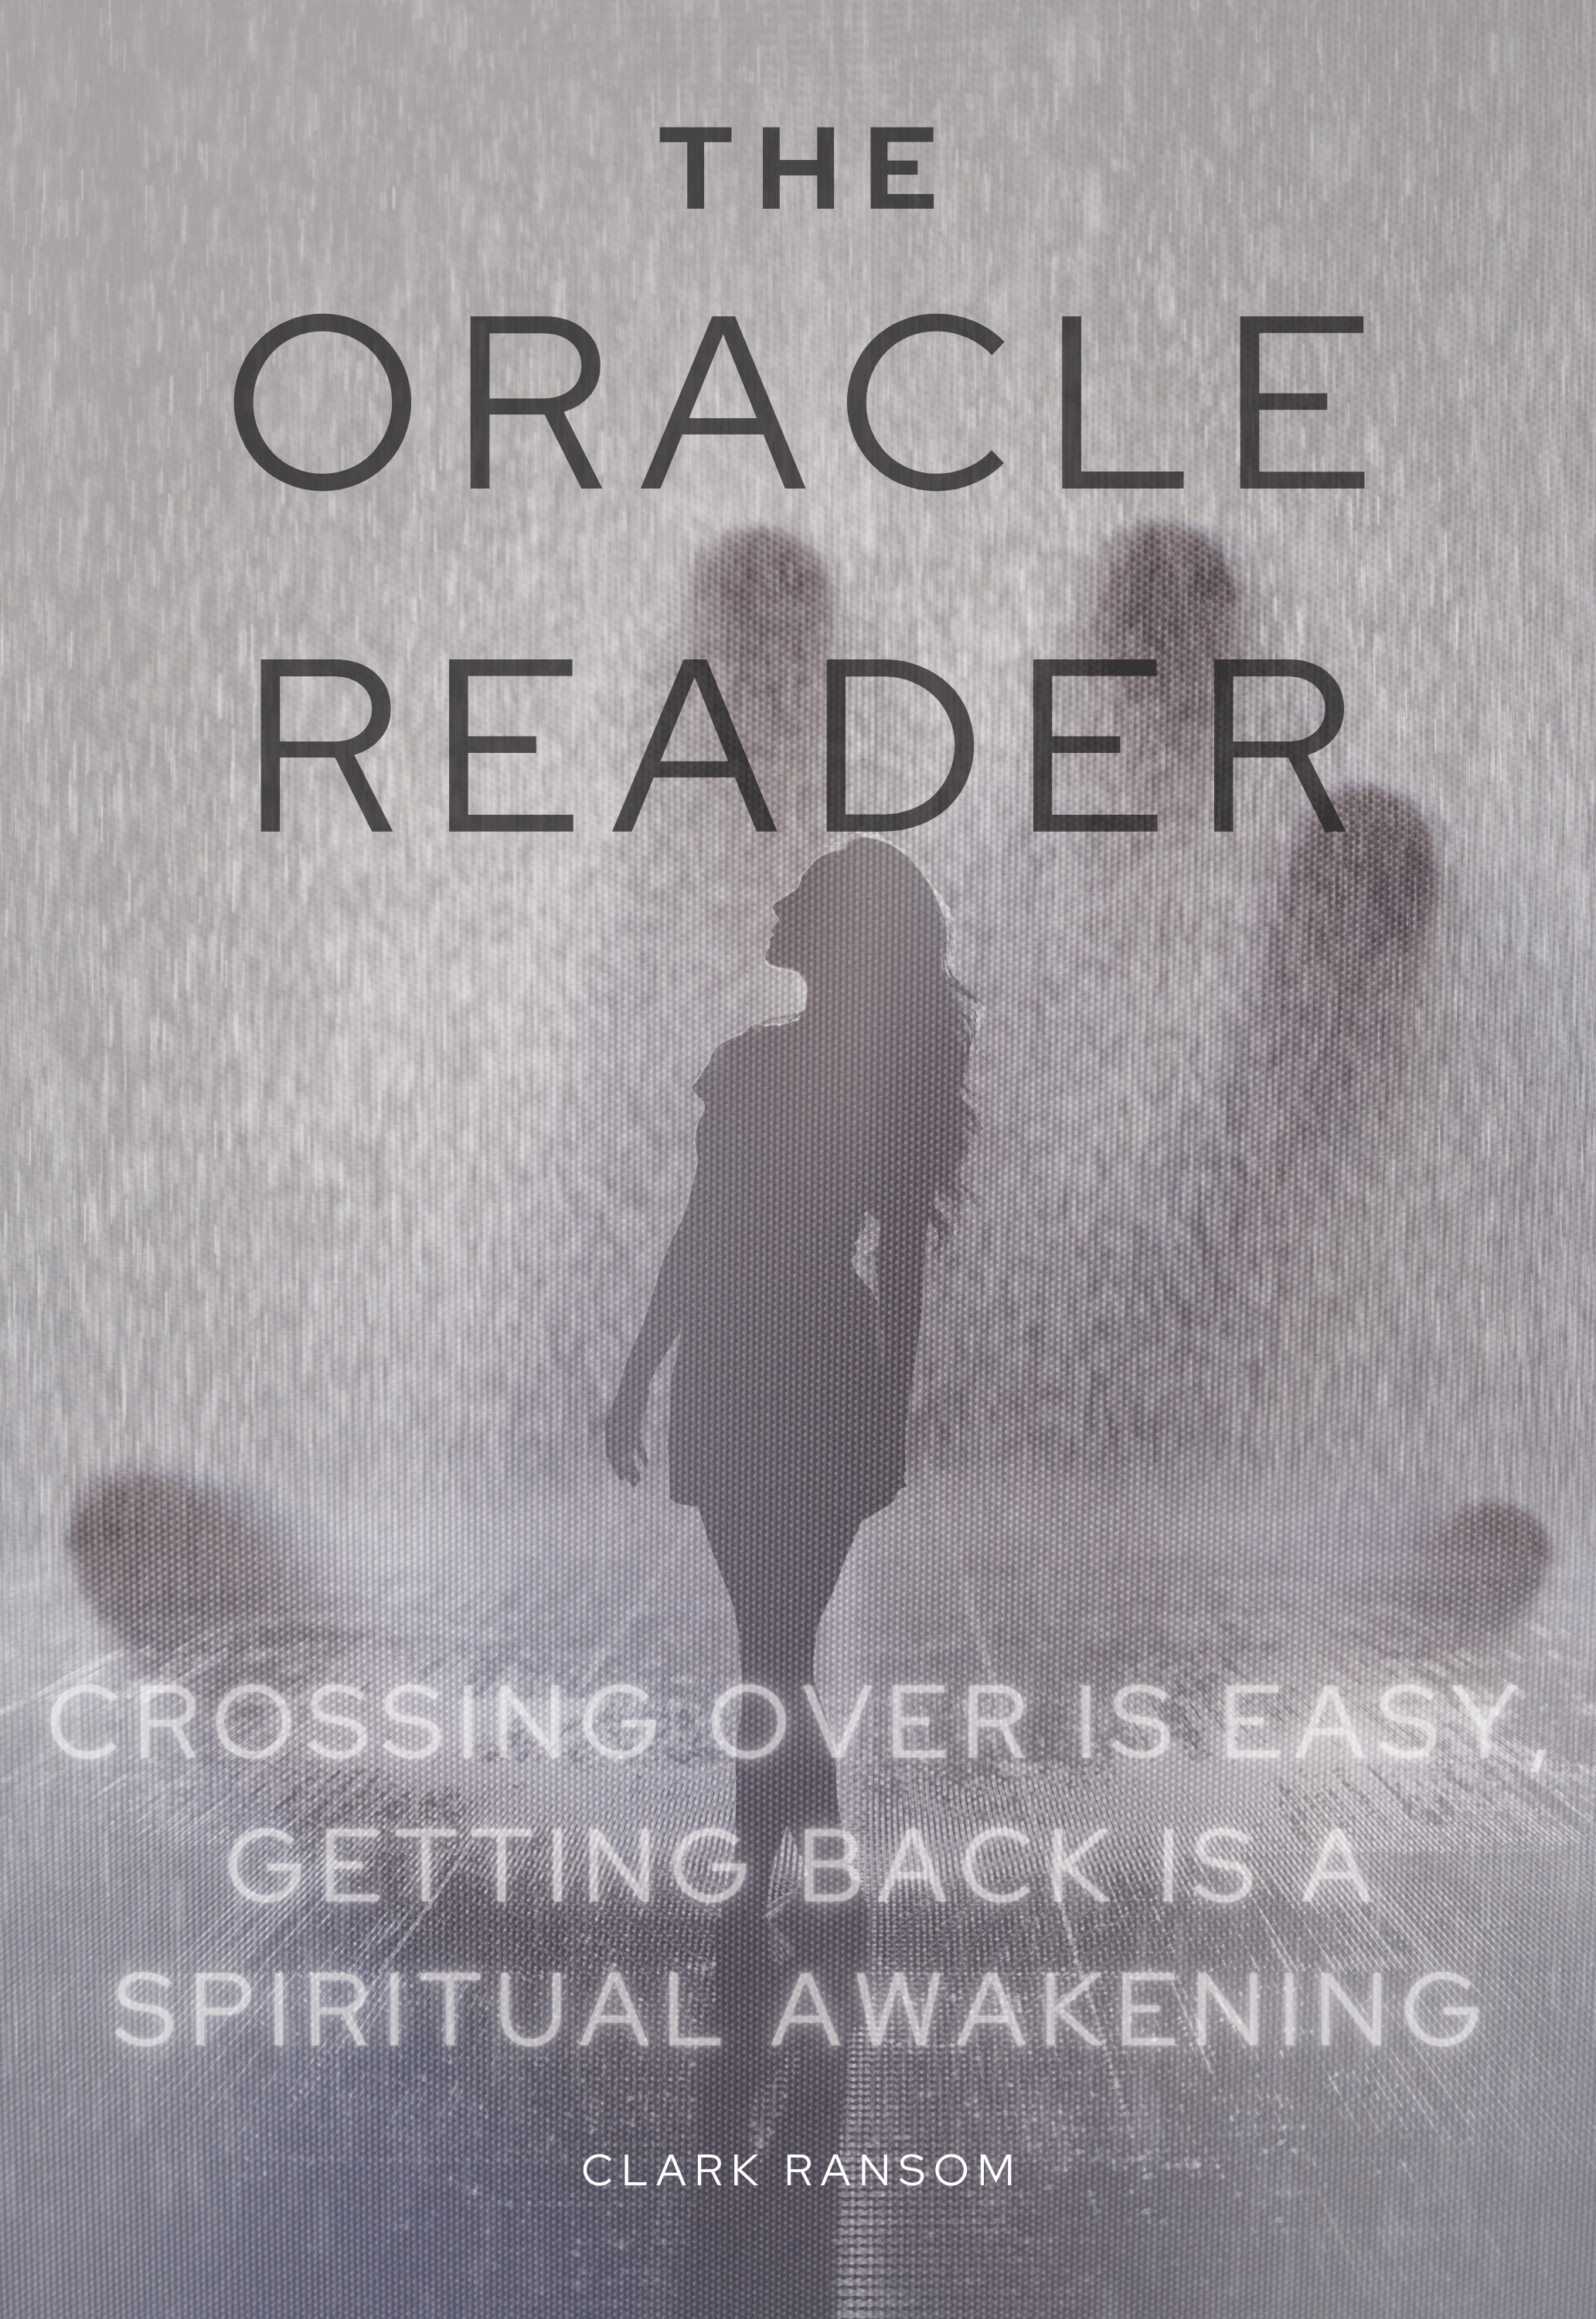 THE ORACLE READER